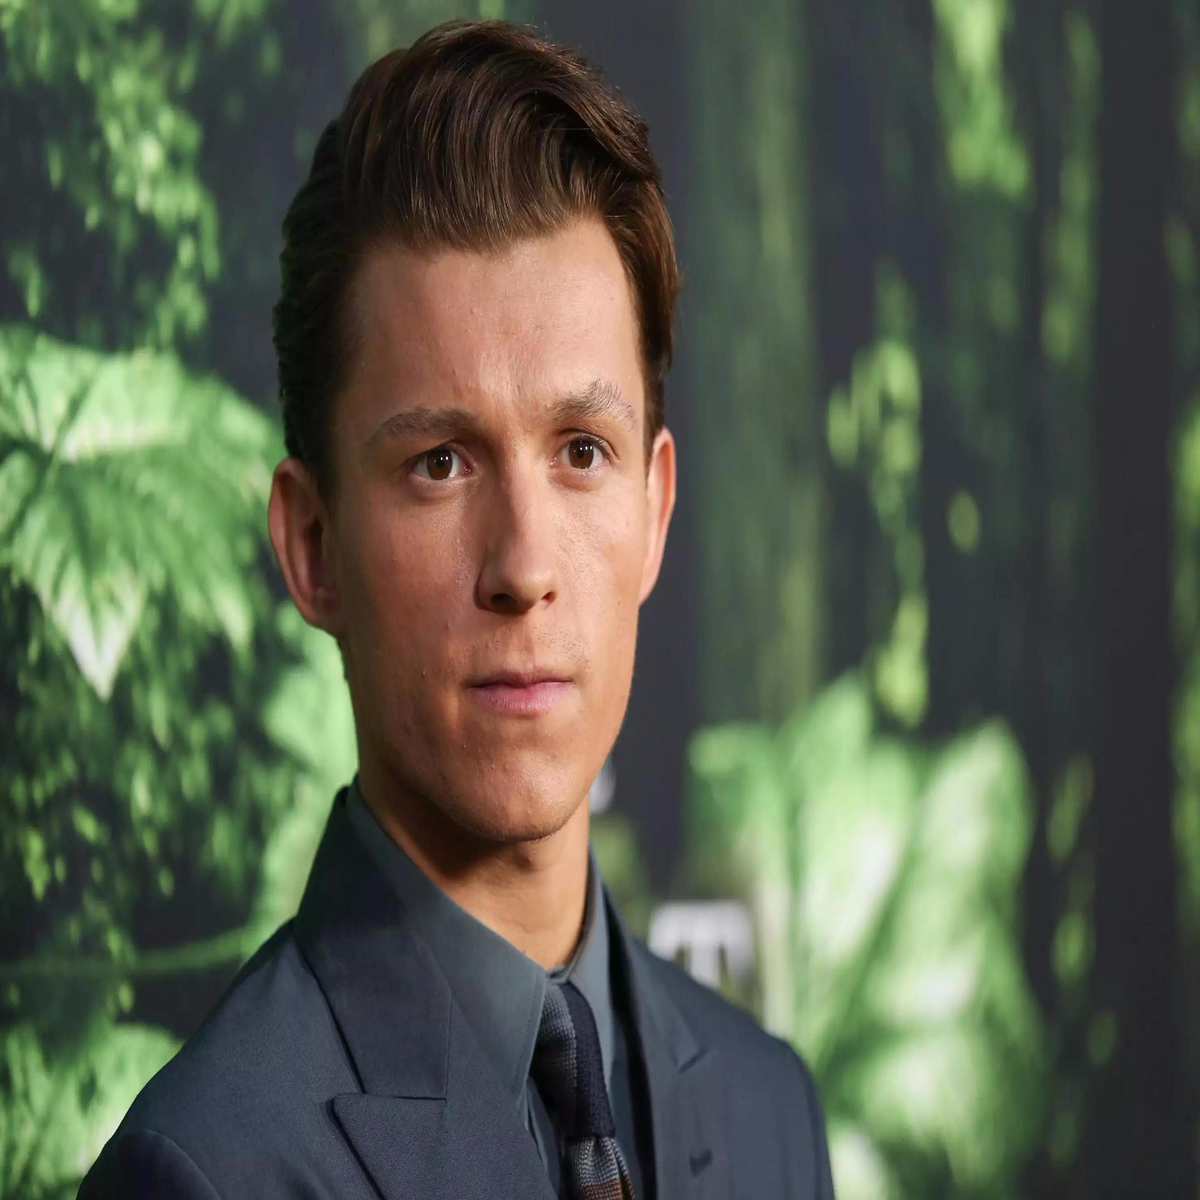 Uncharted Star Tom Holland Shows Off His New Nathan Drake Look